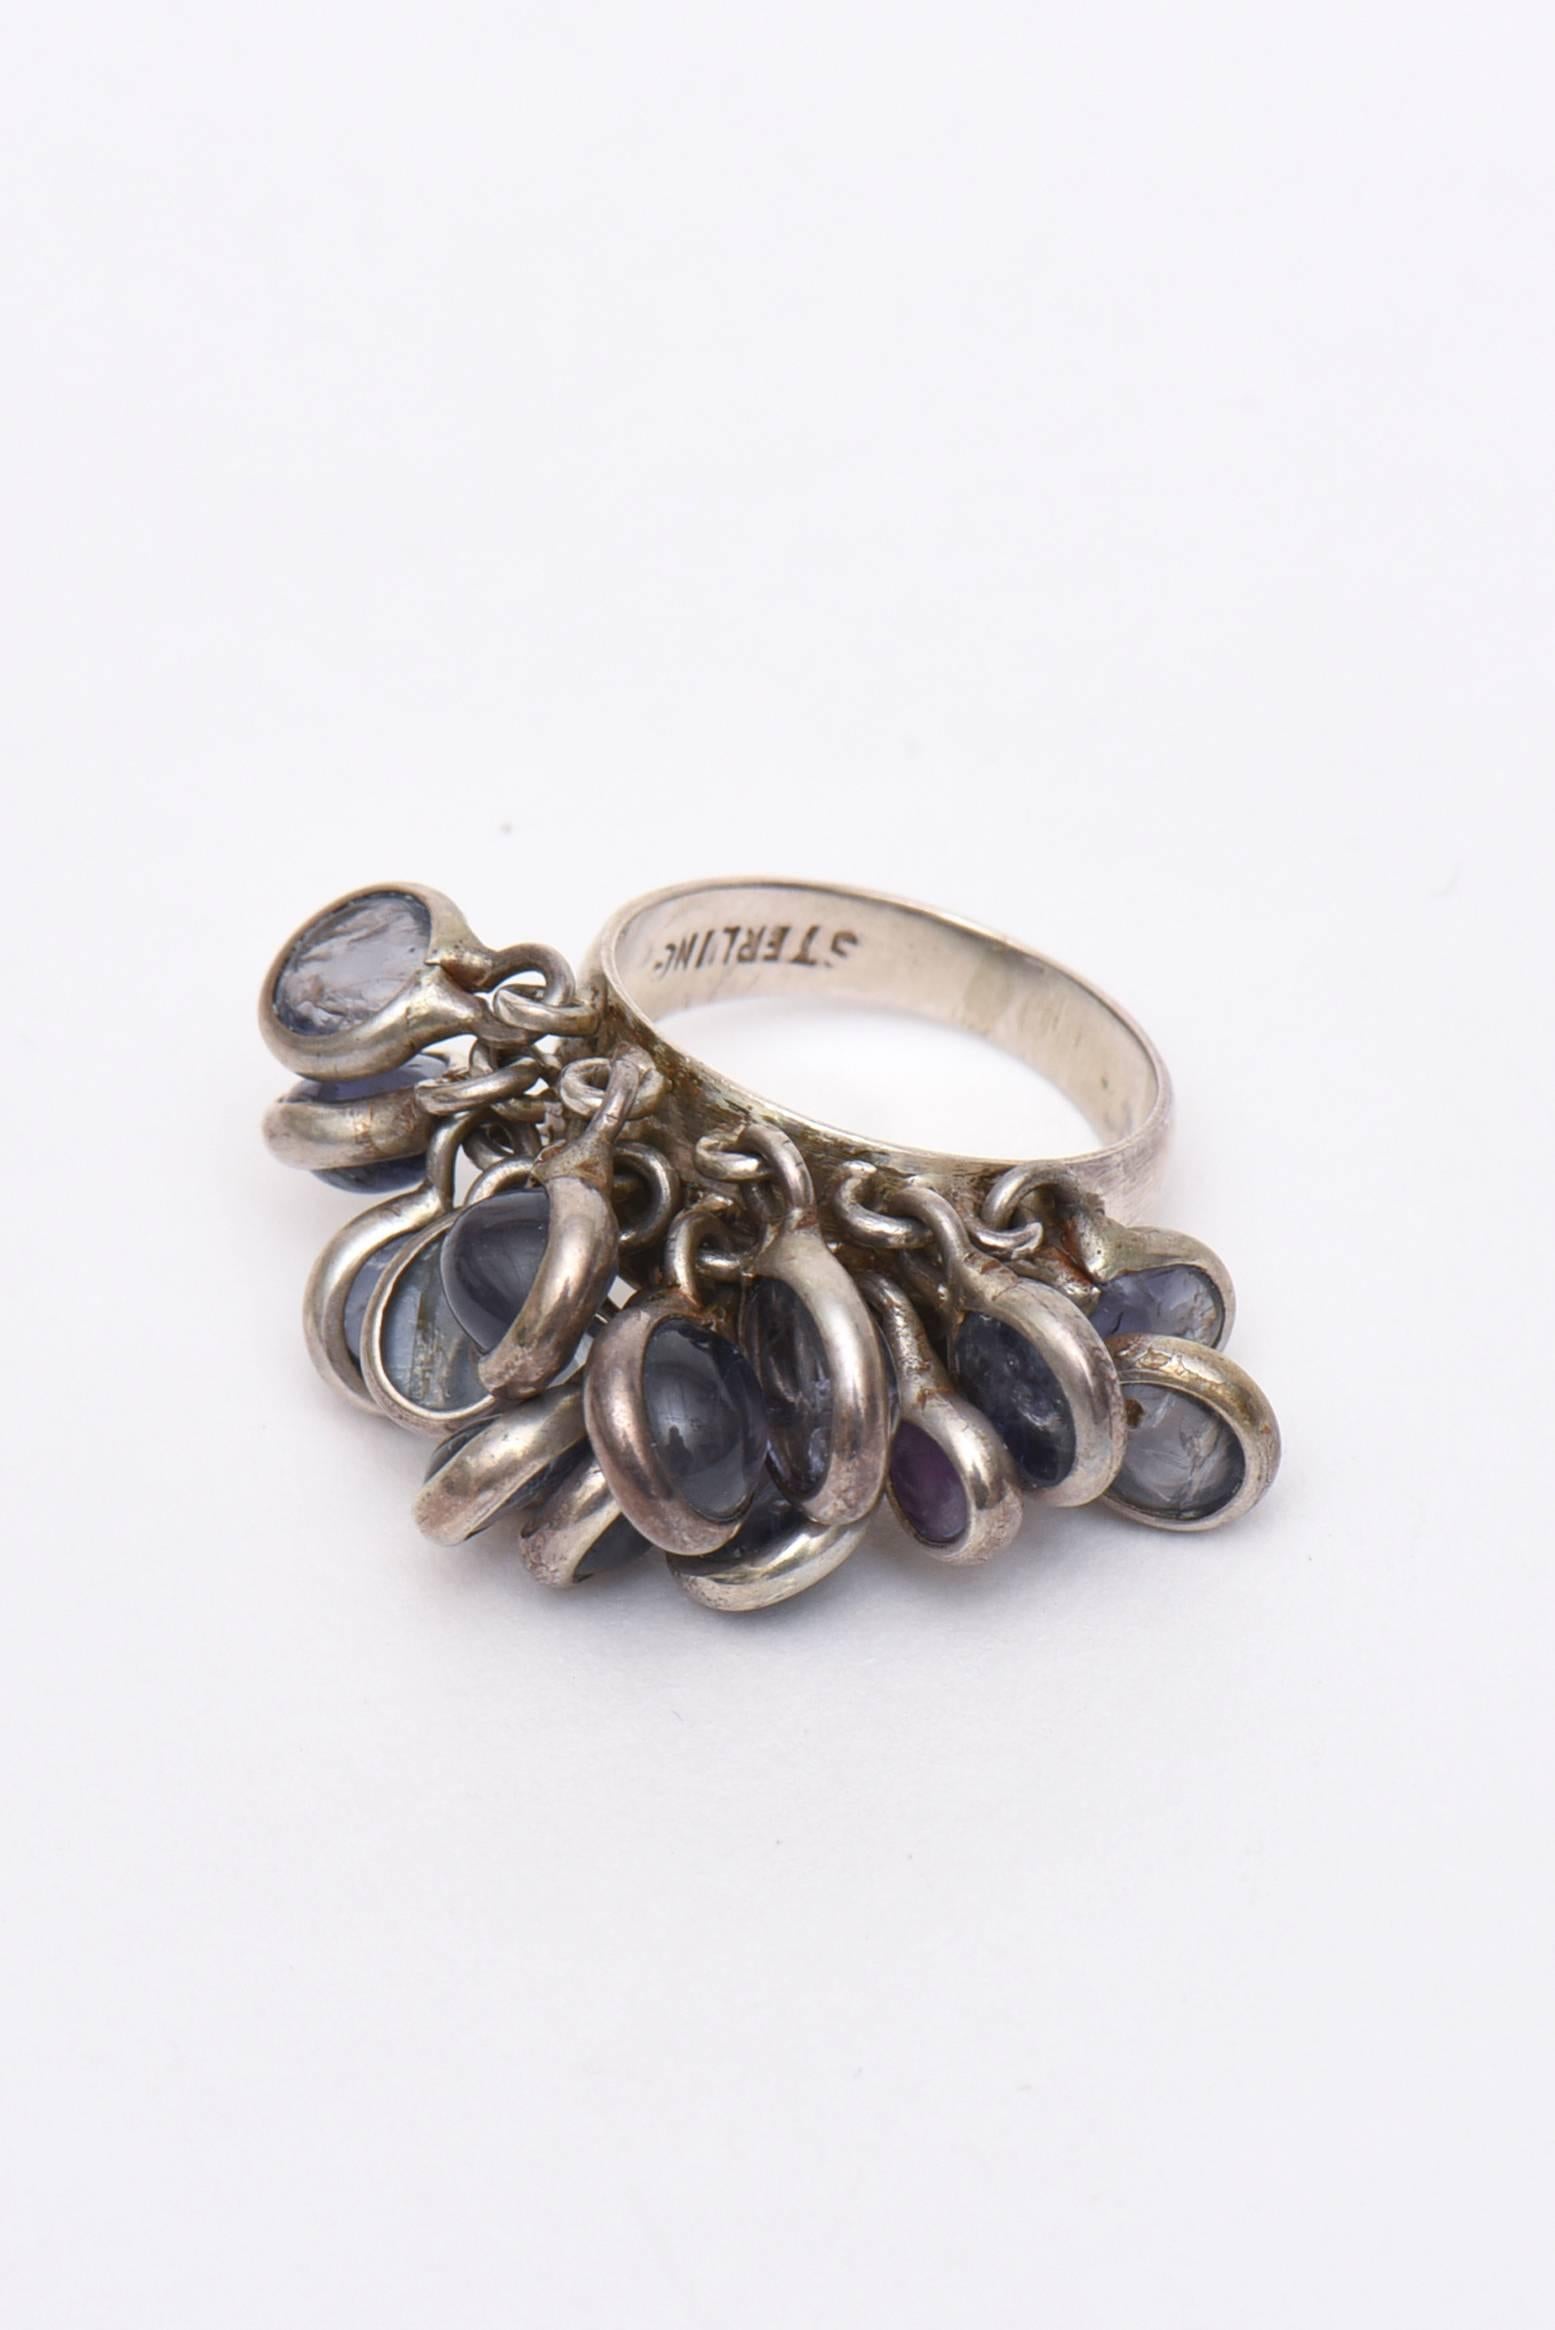 This lovely vintage ring has many disks of sterling silver and amethyst hanging from attached sterling loops. This is a wonderful sculptural ring that has movement and great eye appeal. The ring size is 5 3/4. Almost a size 6. It is marked Sterling